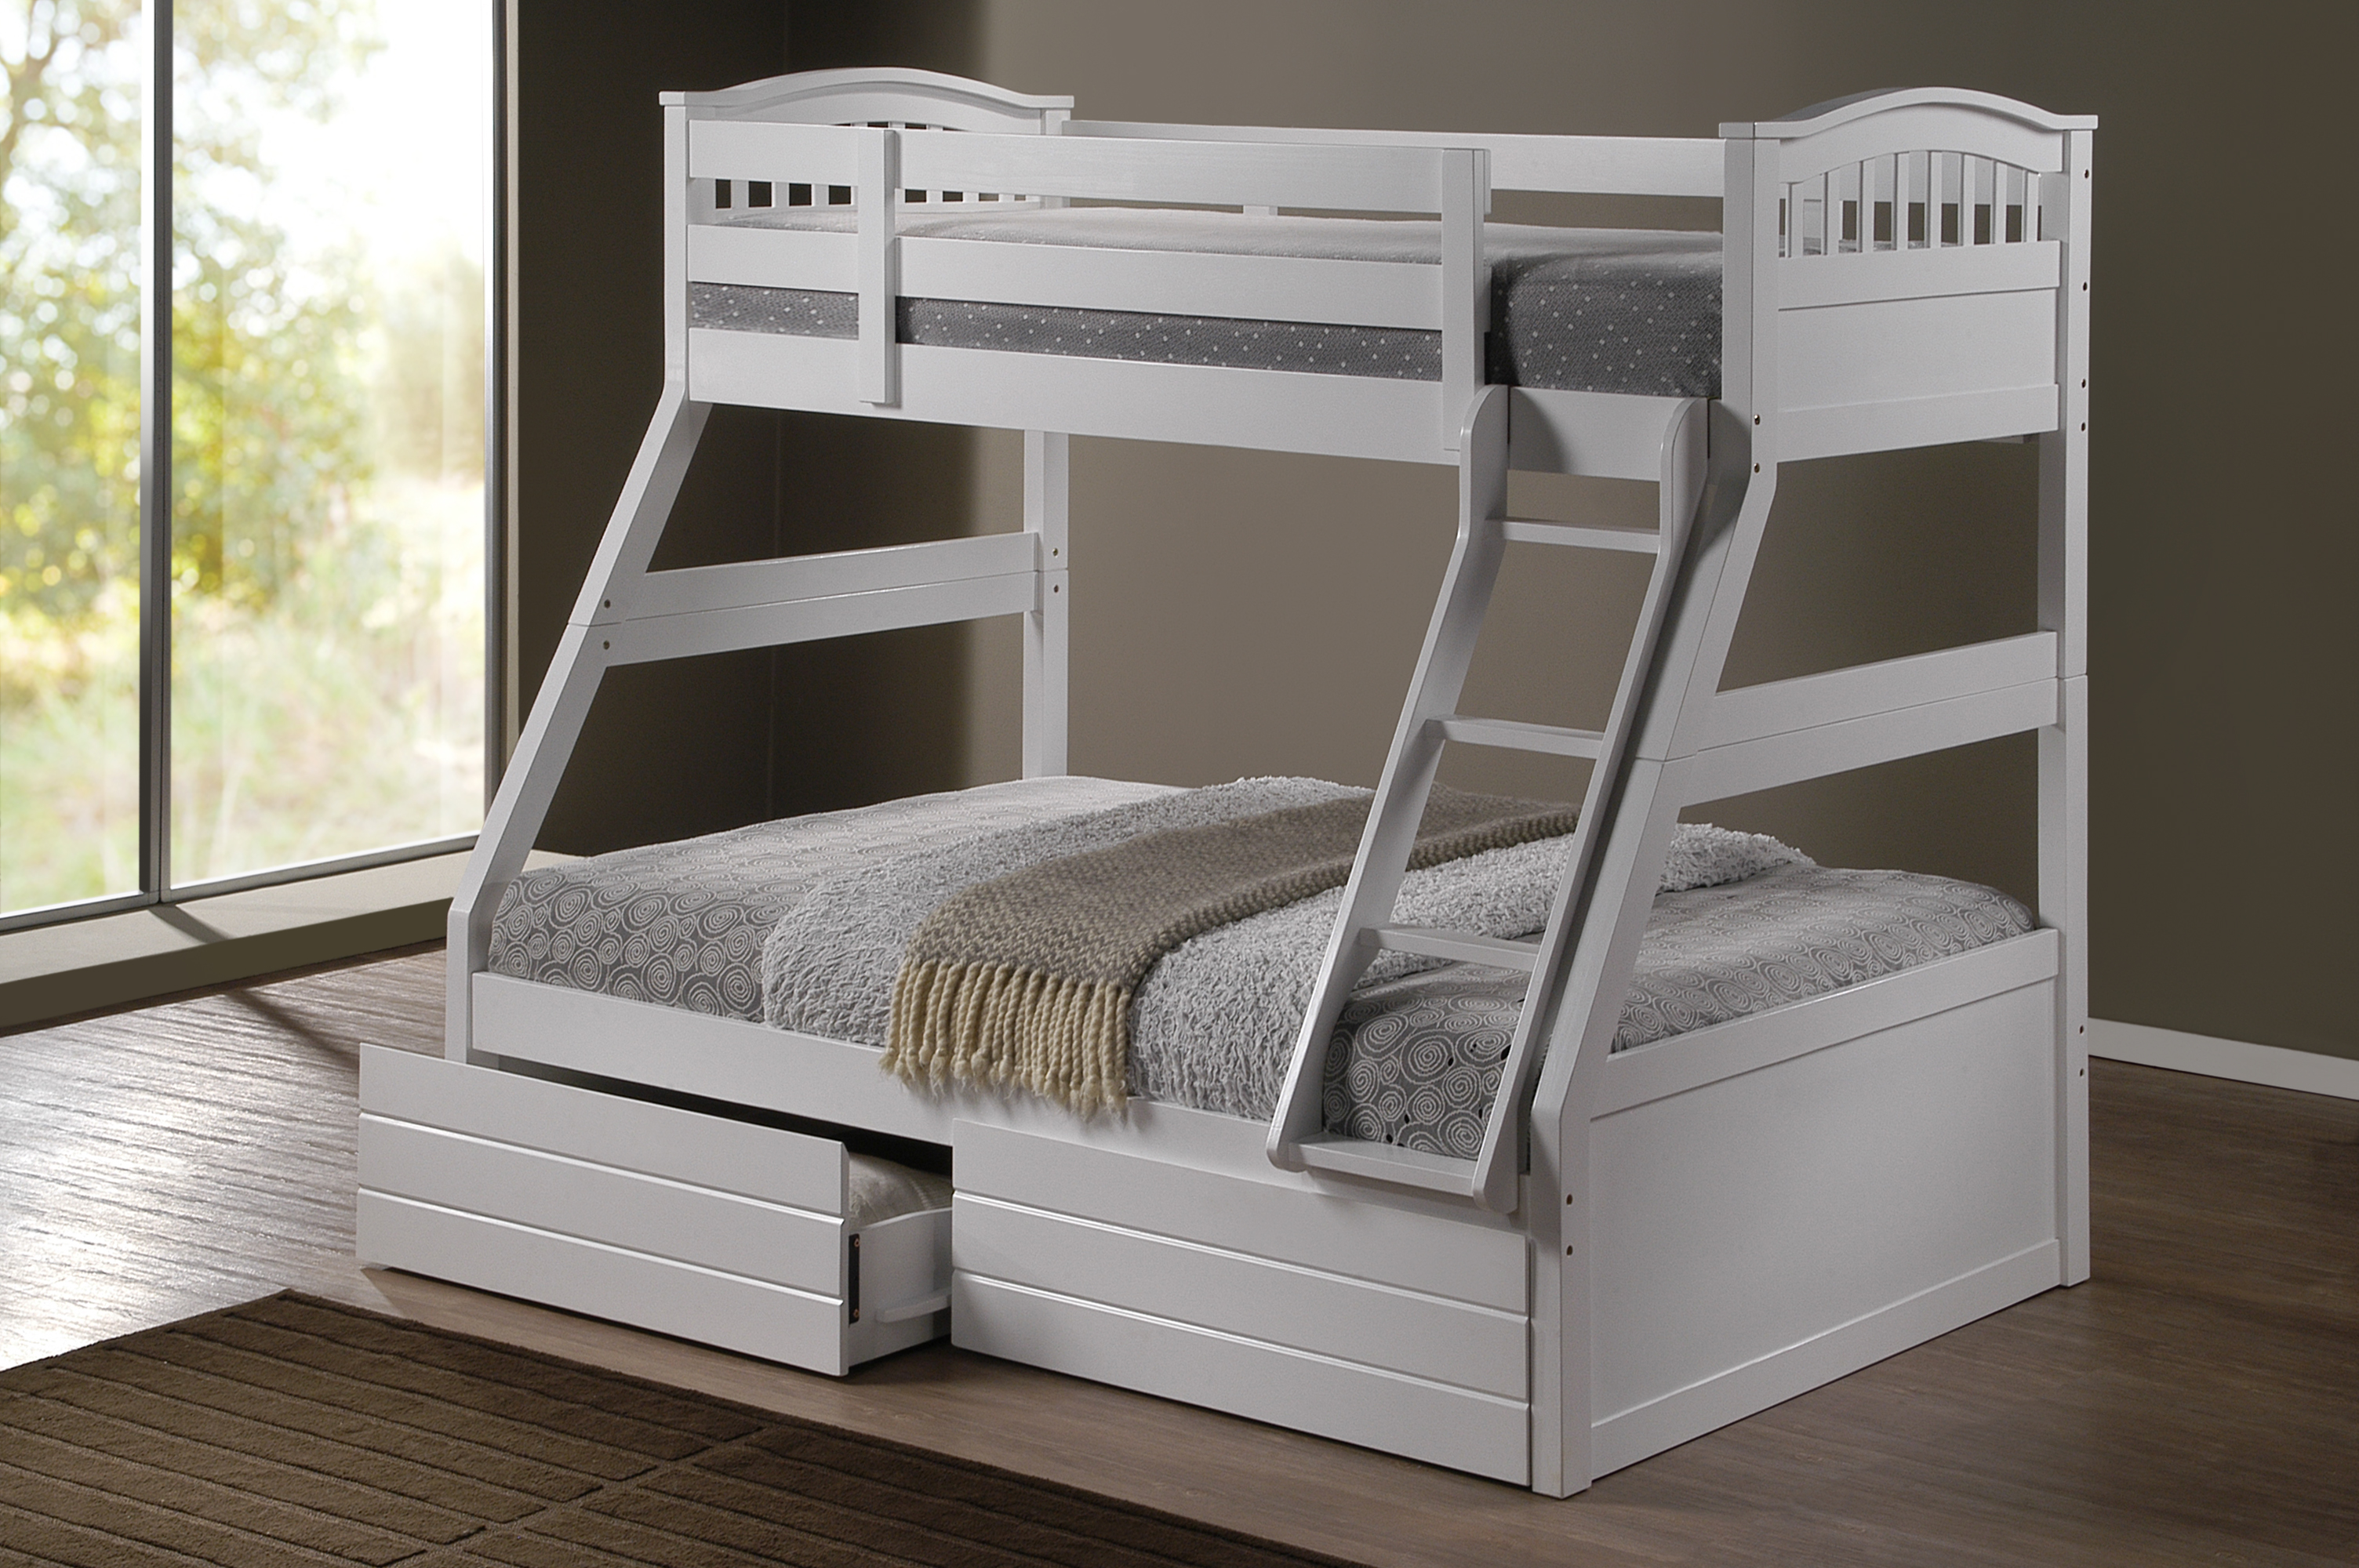 Ashley White Duo, Double Single Bunk Beds with Drawers